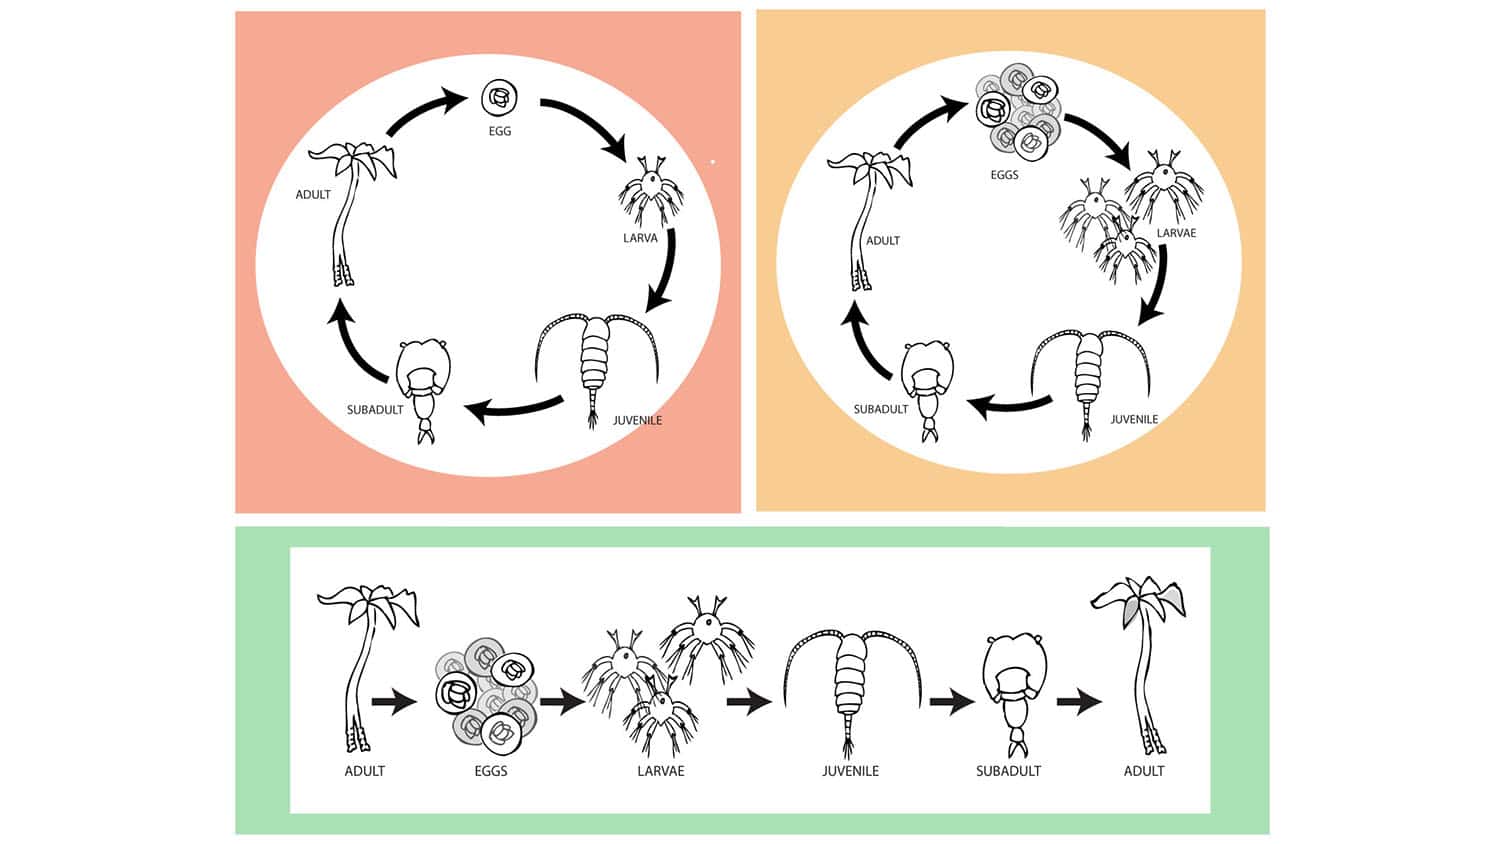 image shows three diagrams of a life cycle. One is circular and shows multiple offspring; one is circular and shows a sinigle offspring; one is linear and shows multiple offspring